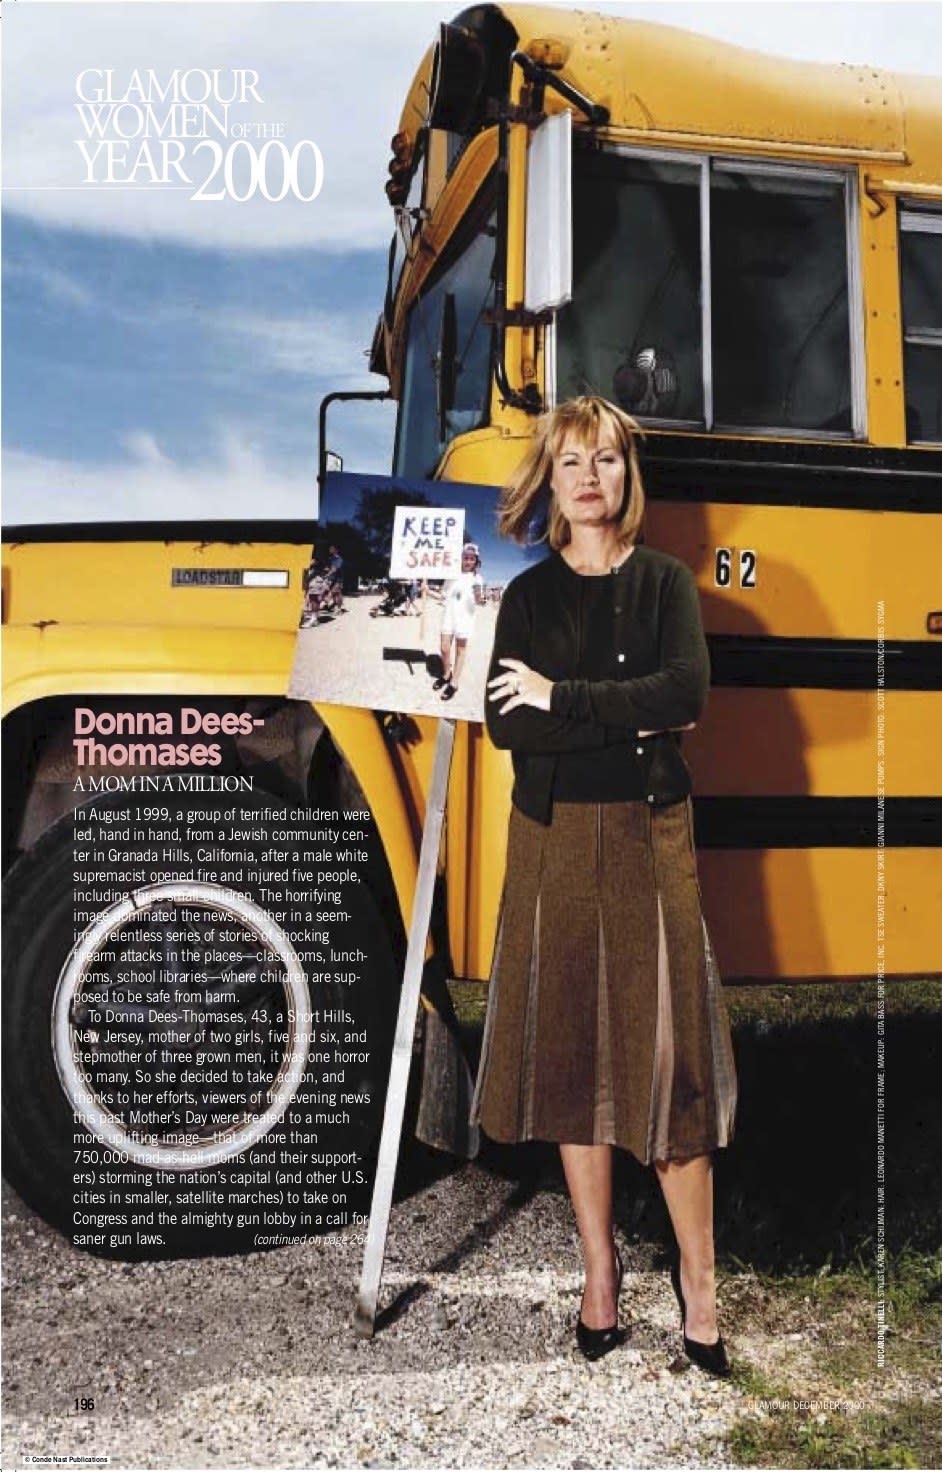 The feature in Glamour's 2000 Women of the Year issue on Donna Dees-Thomases